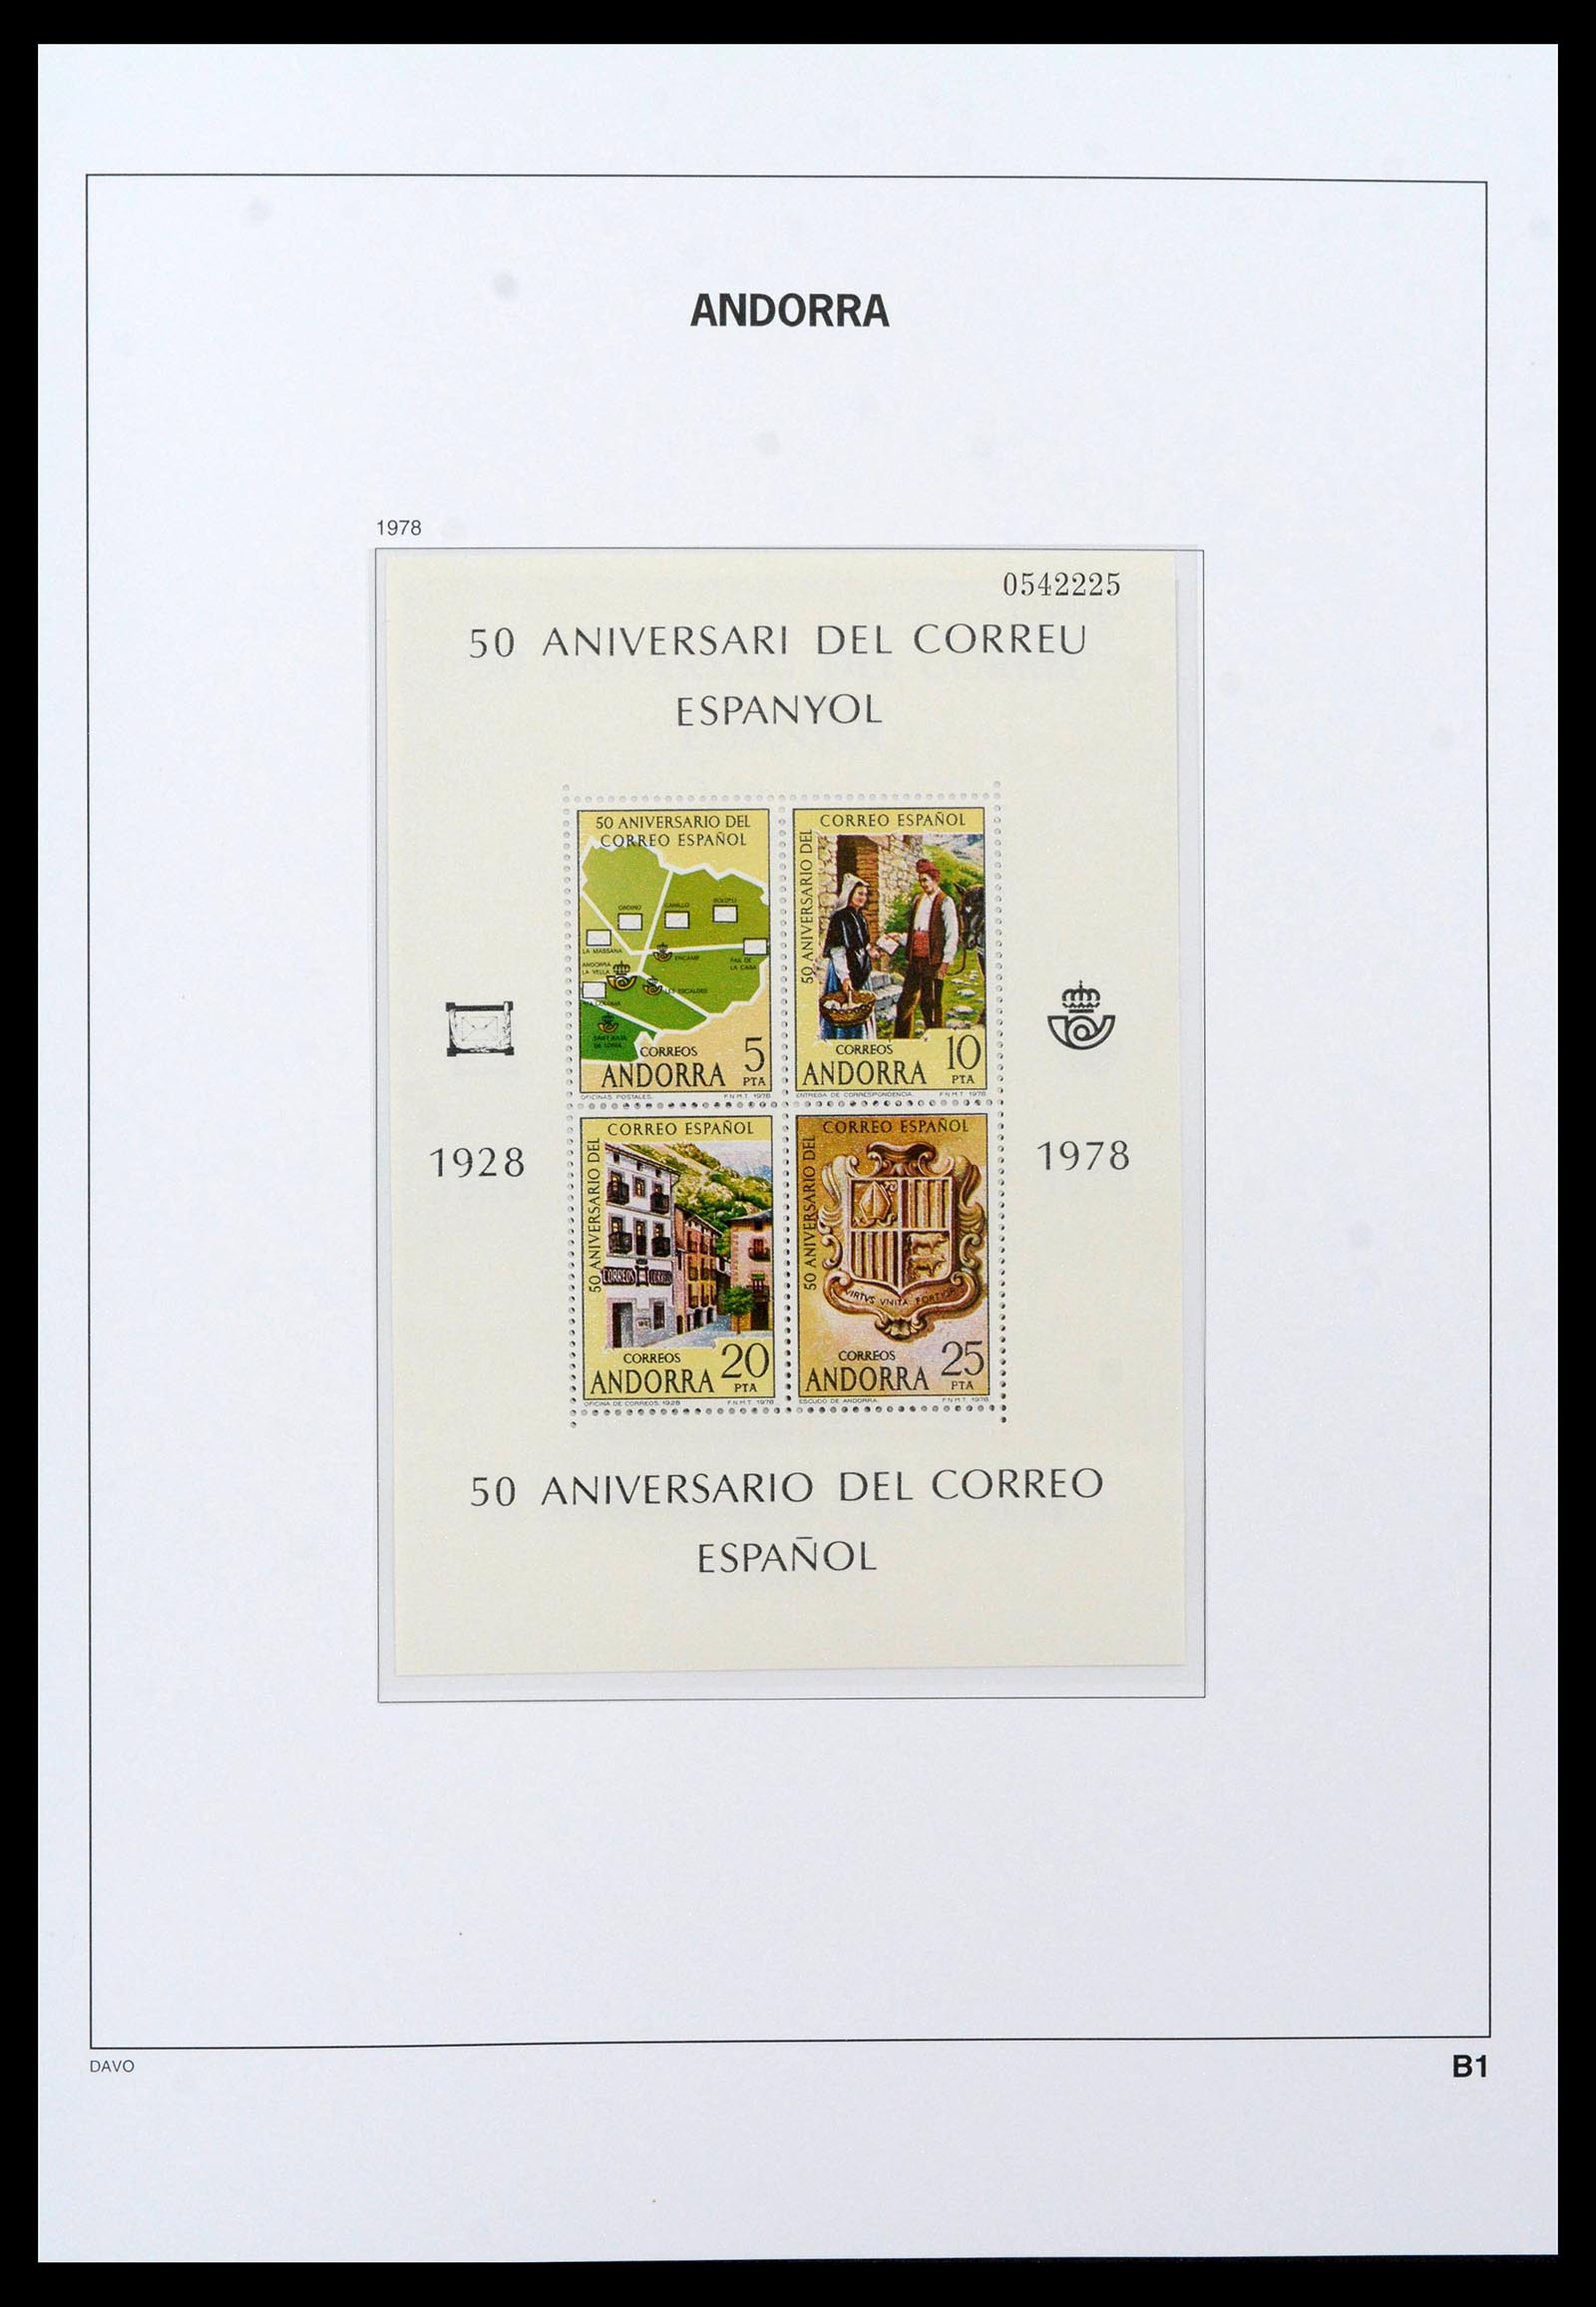 39388 0049 - Stamp collection 39388 Spanish Andorra 1928-2019!